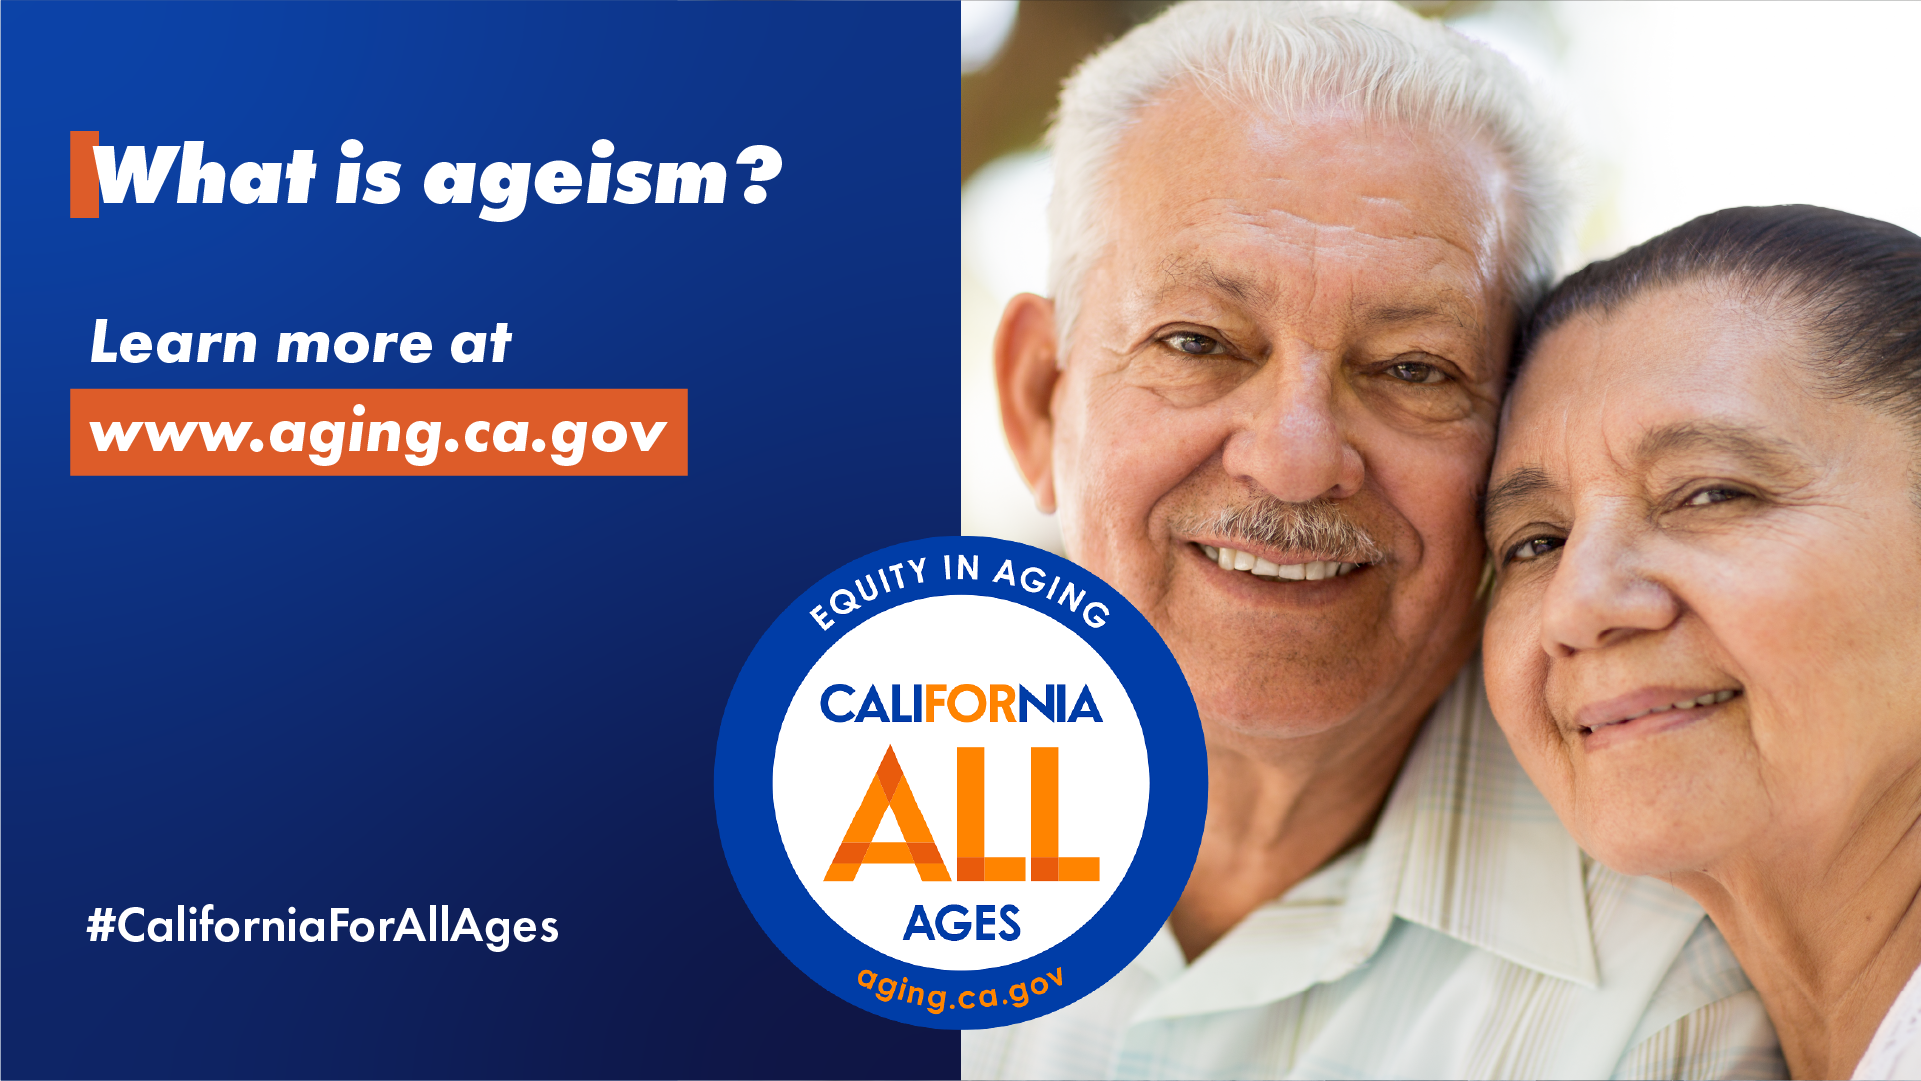 What is ageism? Learn more at aging.ca.gov. California For All Ages logo, #CaliforniaForAllAges. Photo of older adult man and woman smiling.